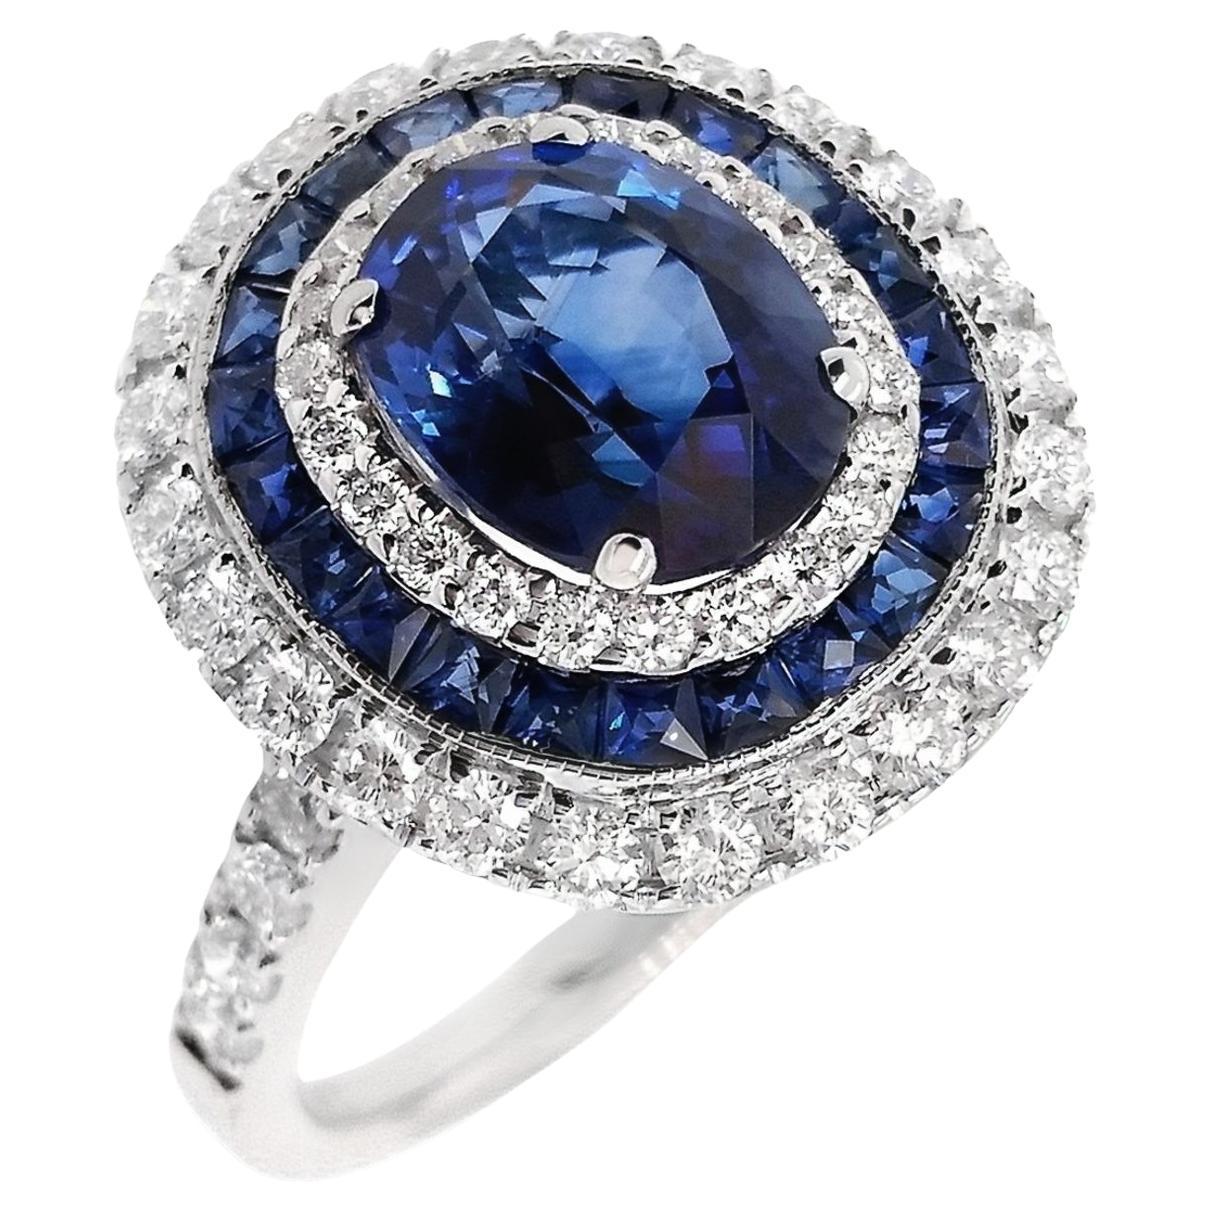 IGI Certified 2.87ct Natural Sapphires and 0.74ct Diamonds 18k White Gold Ring For Sale